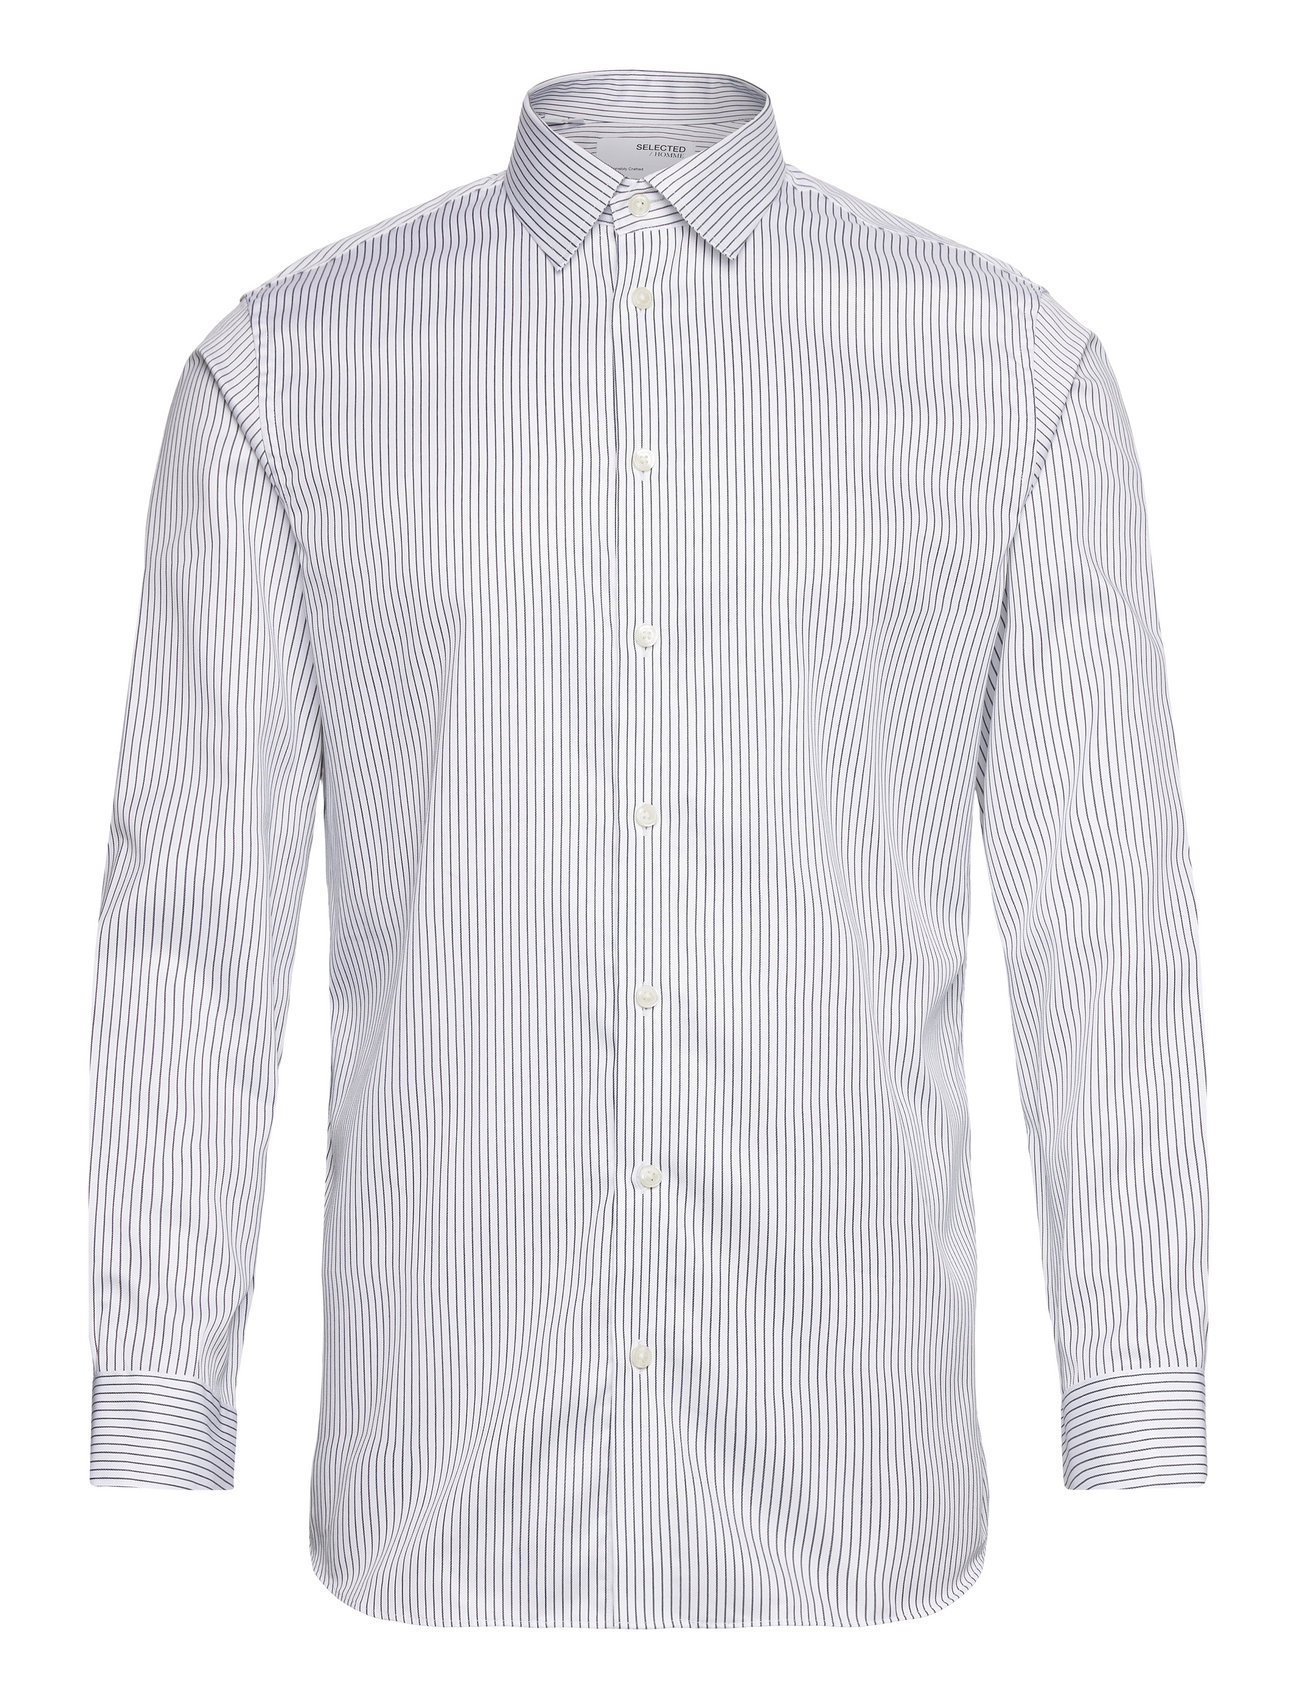 Selected Homme Slhslimethan Shirt Ls Classic – shirts – shop at Booztlet